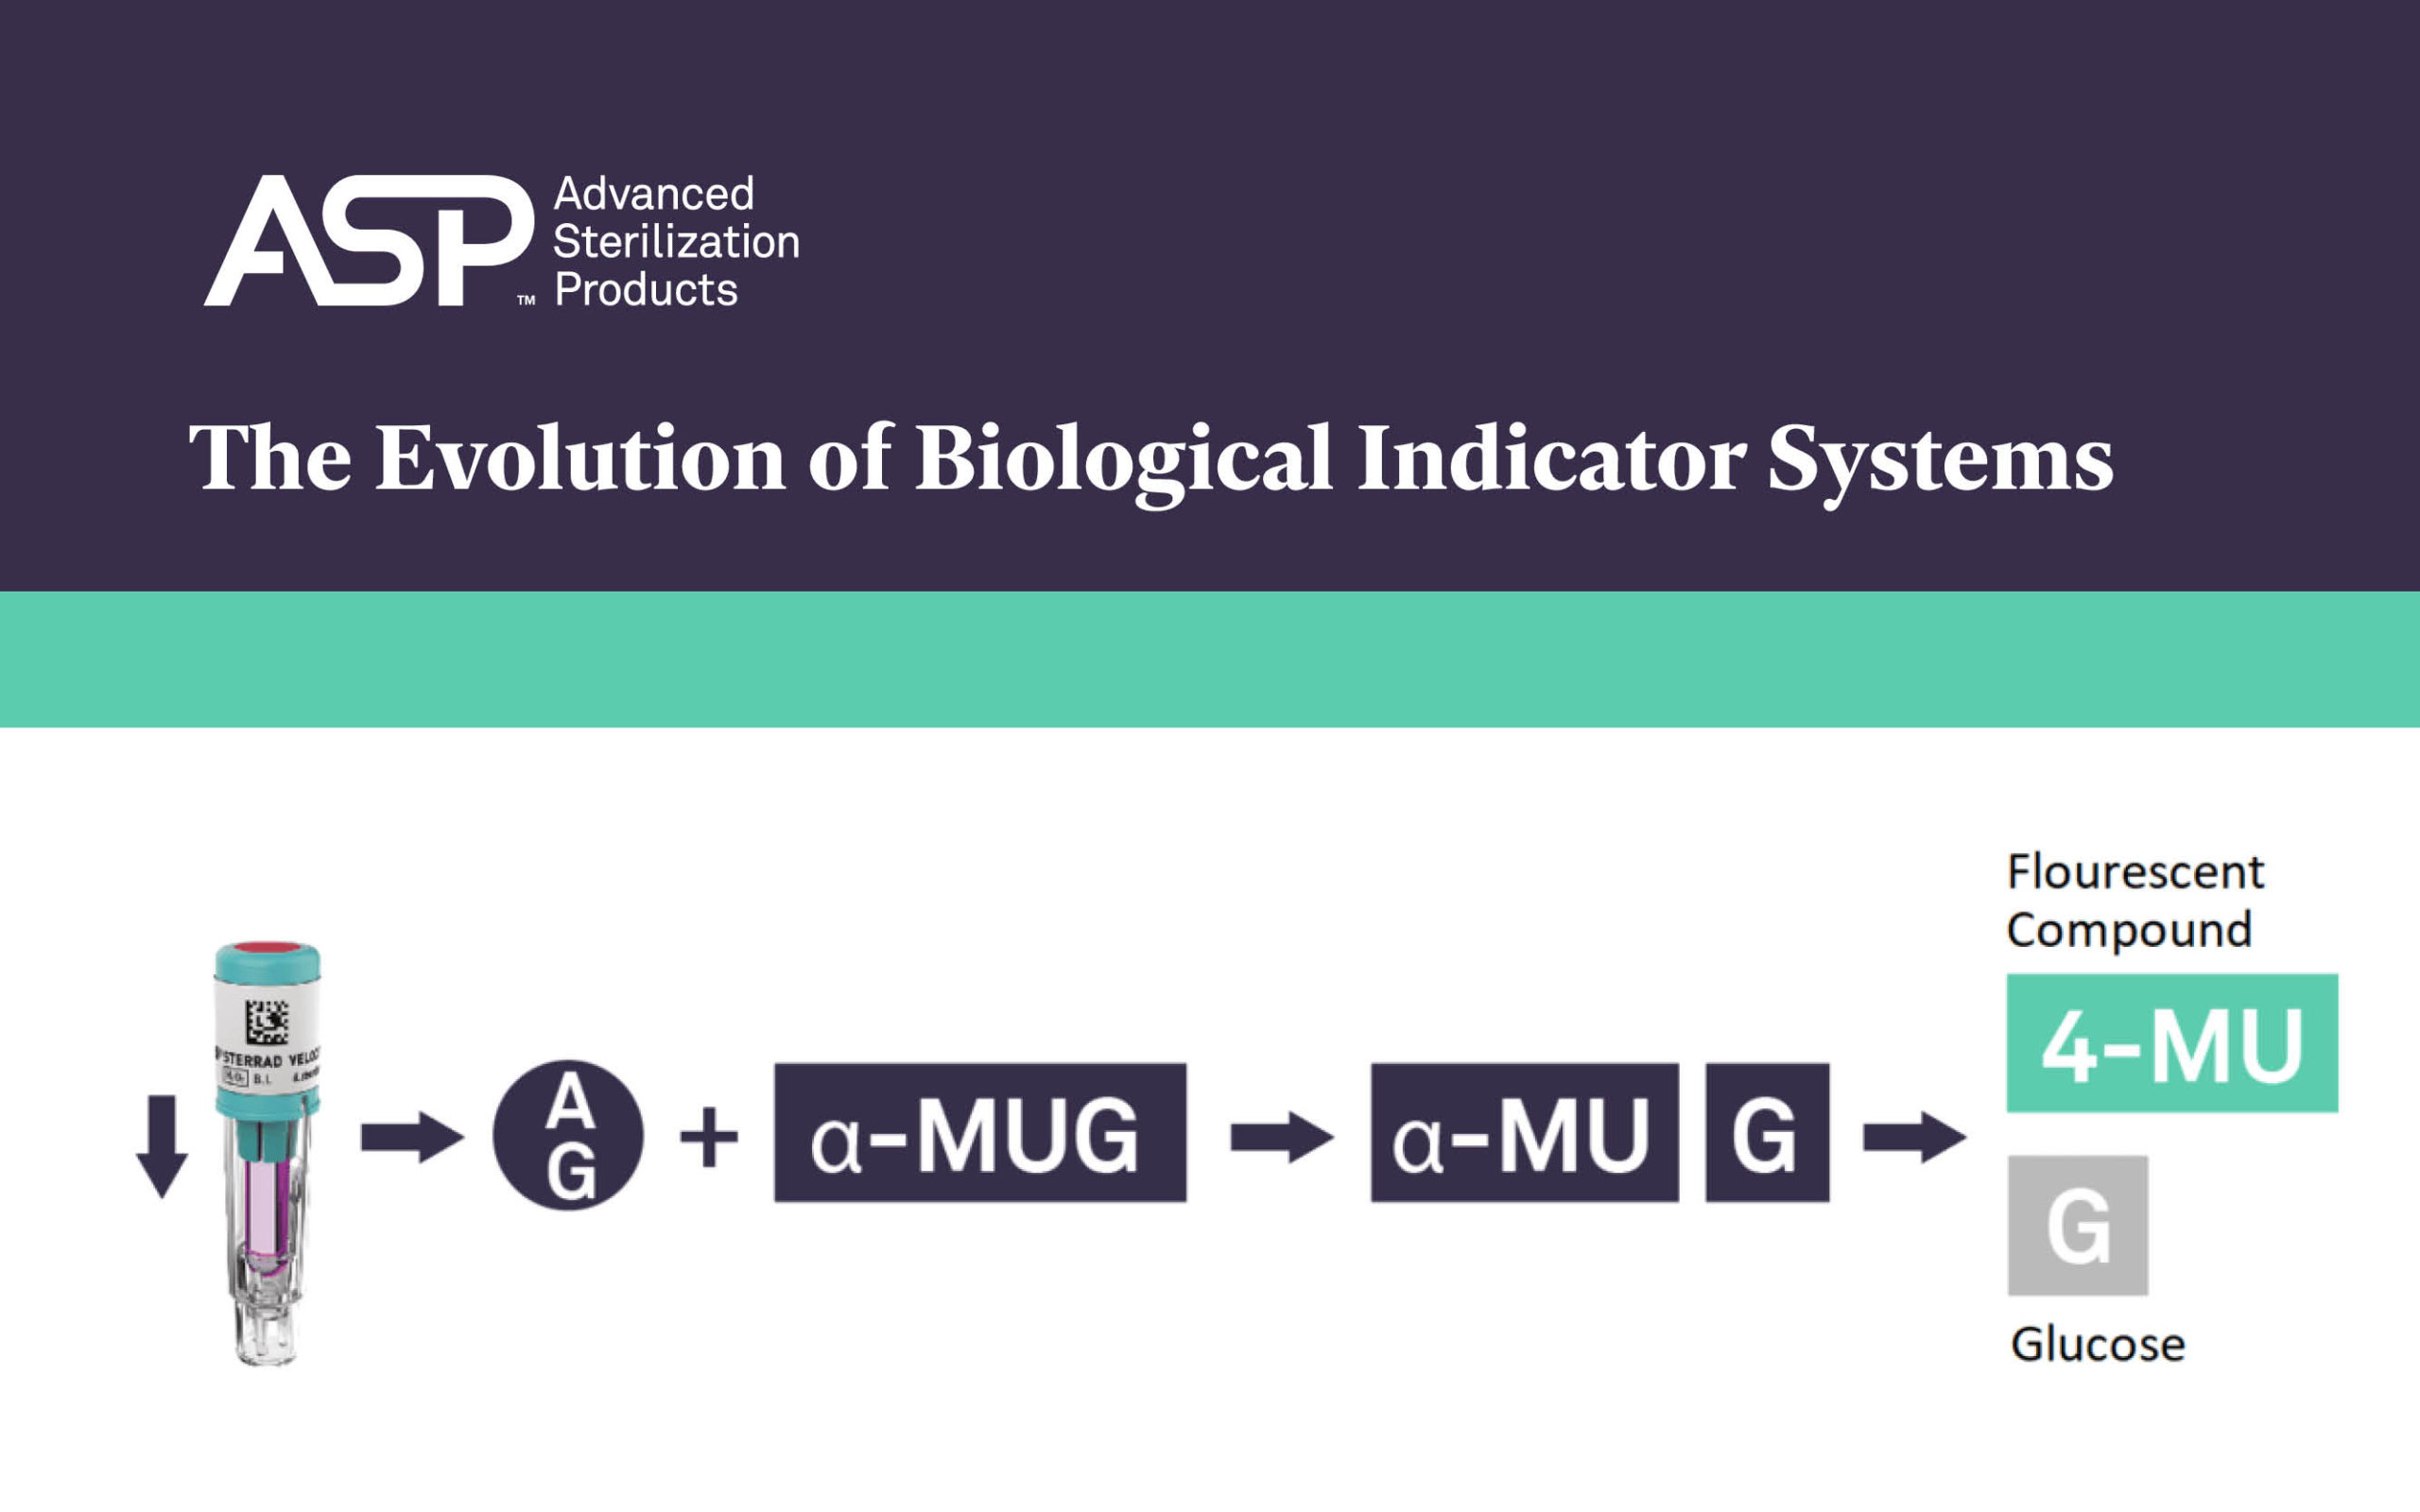 The Evolution of Biological Indicator Systems